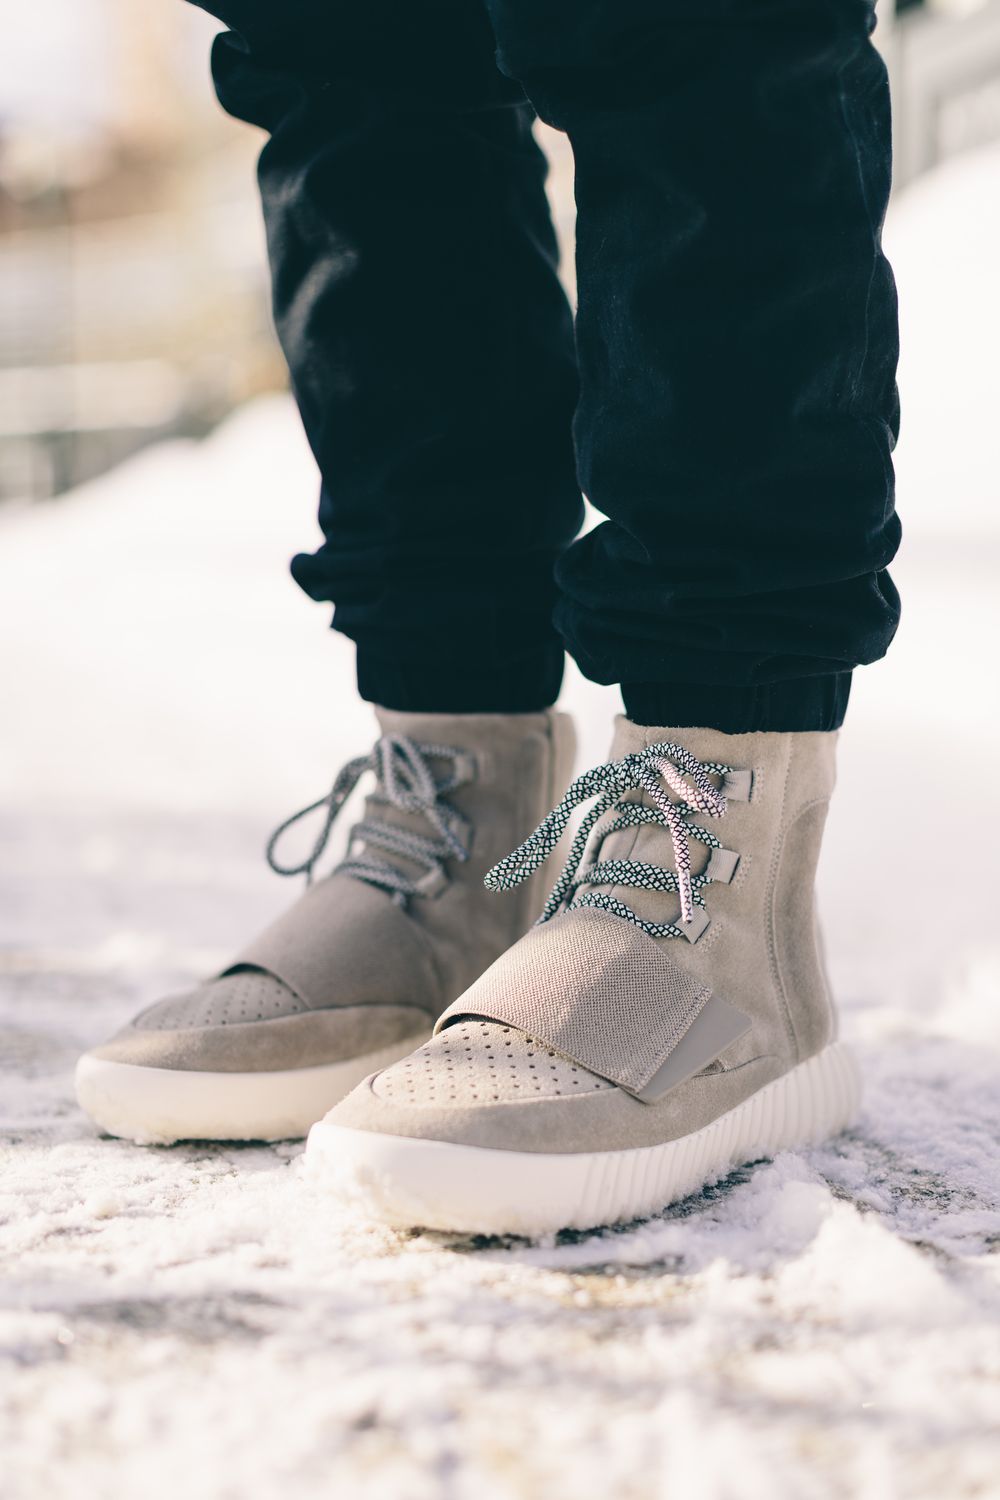 yeezy boost 750 fit